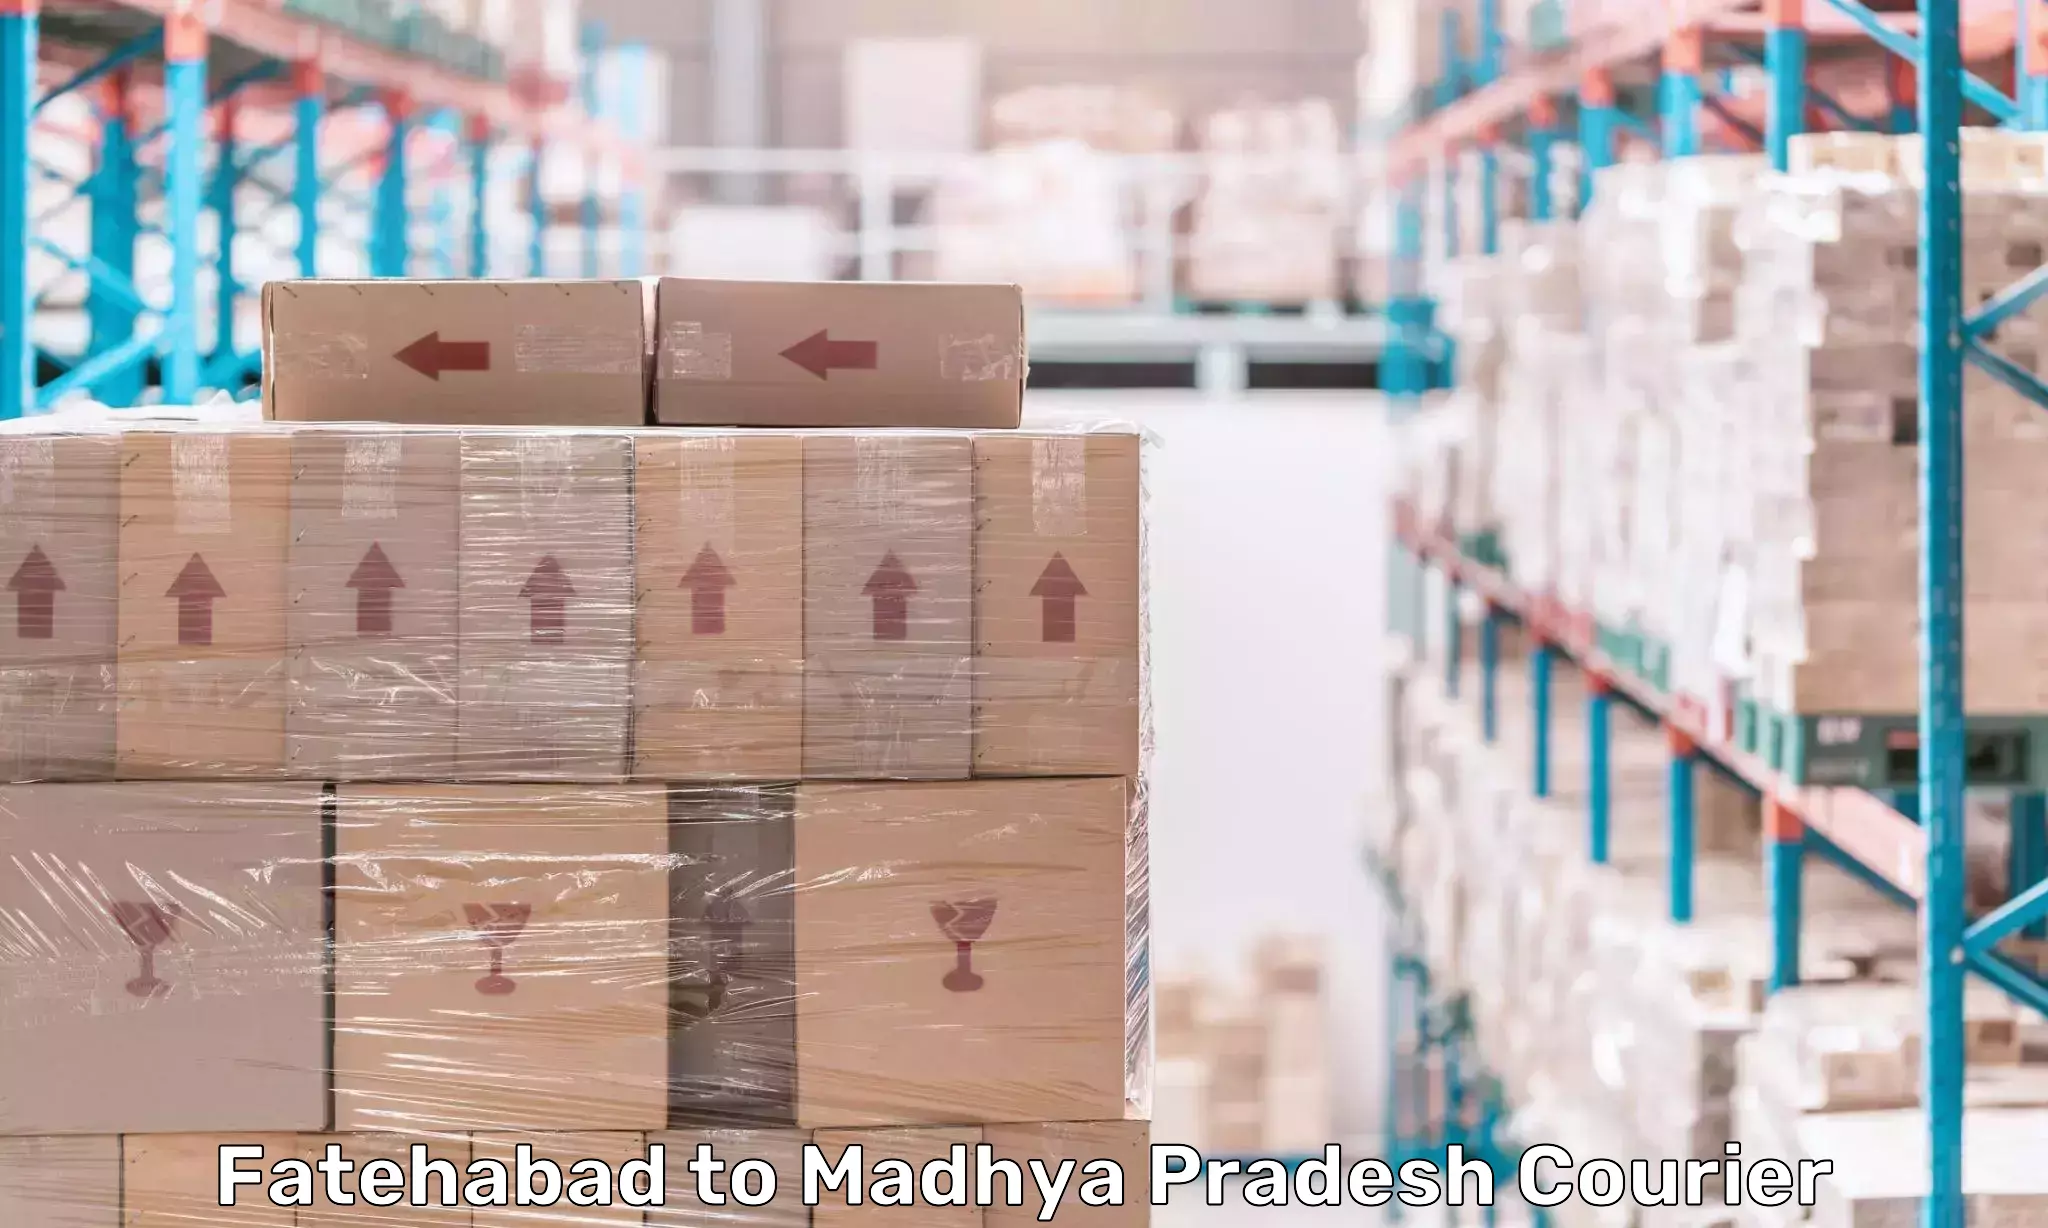 Round-the-clock parcel delivery Fatehabad to Madhya Pradesh